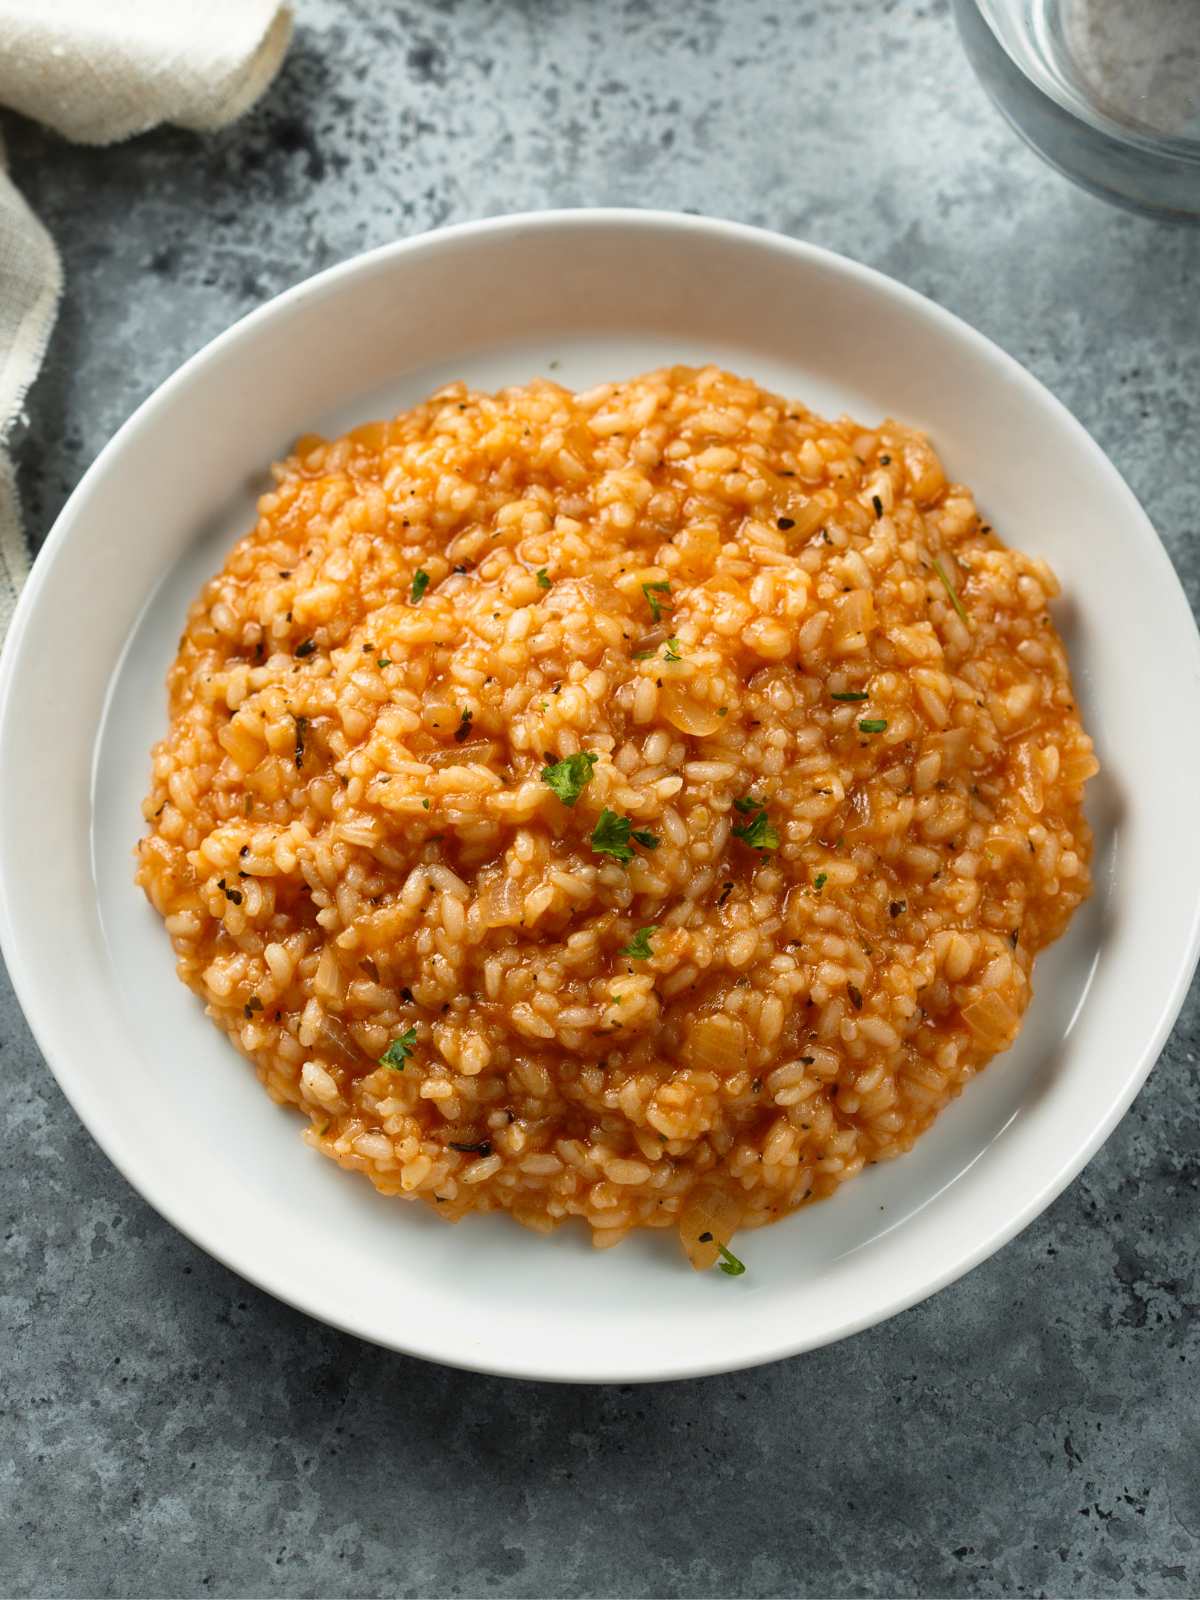 Tomato risotto on a plate topped with fresh herbs.